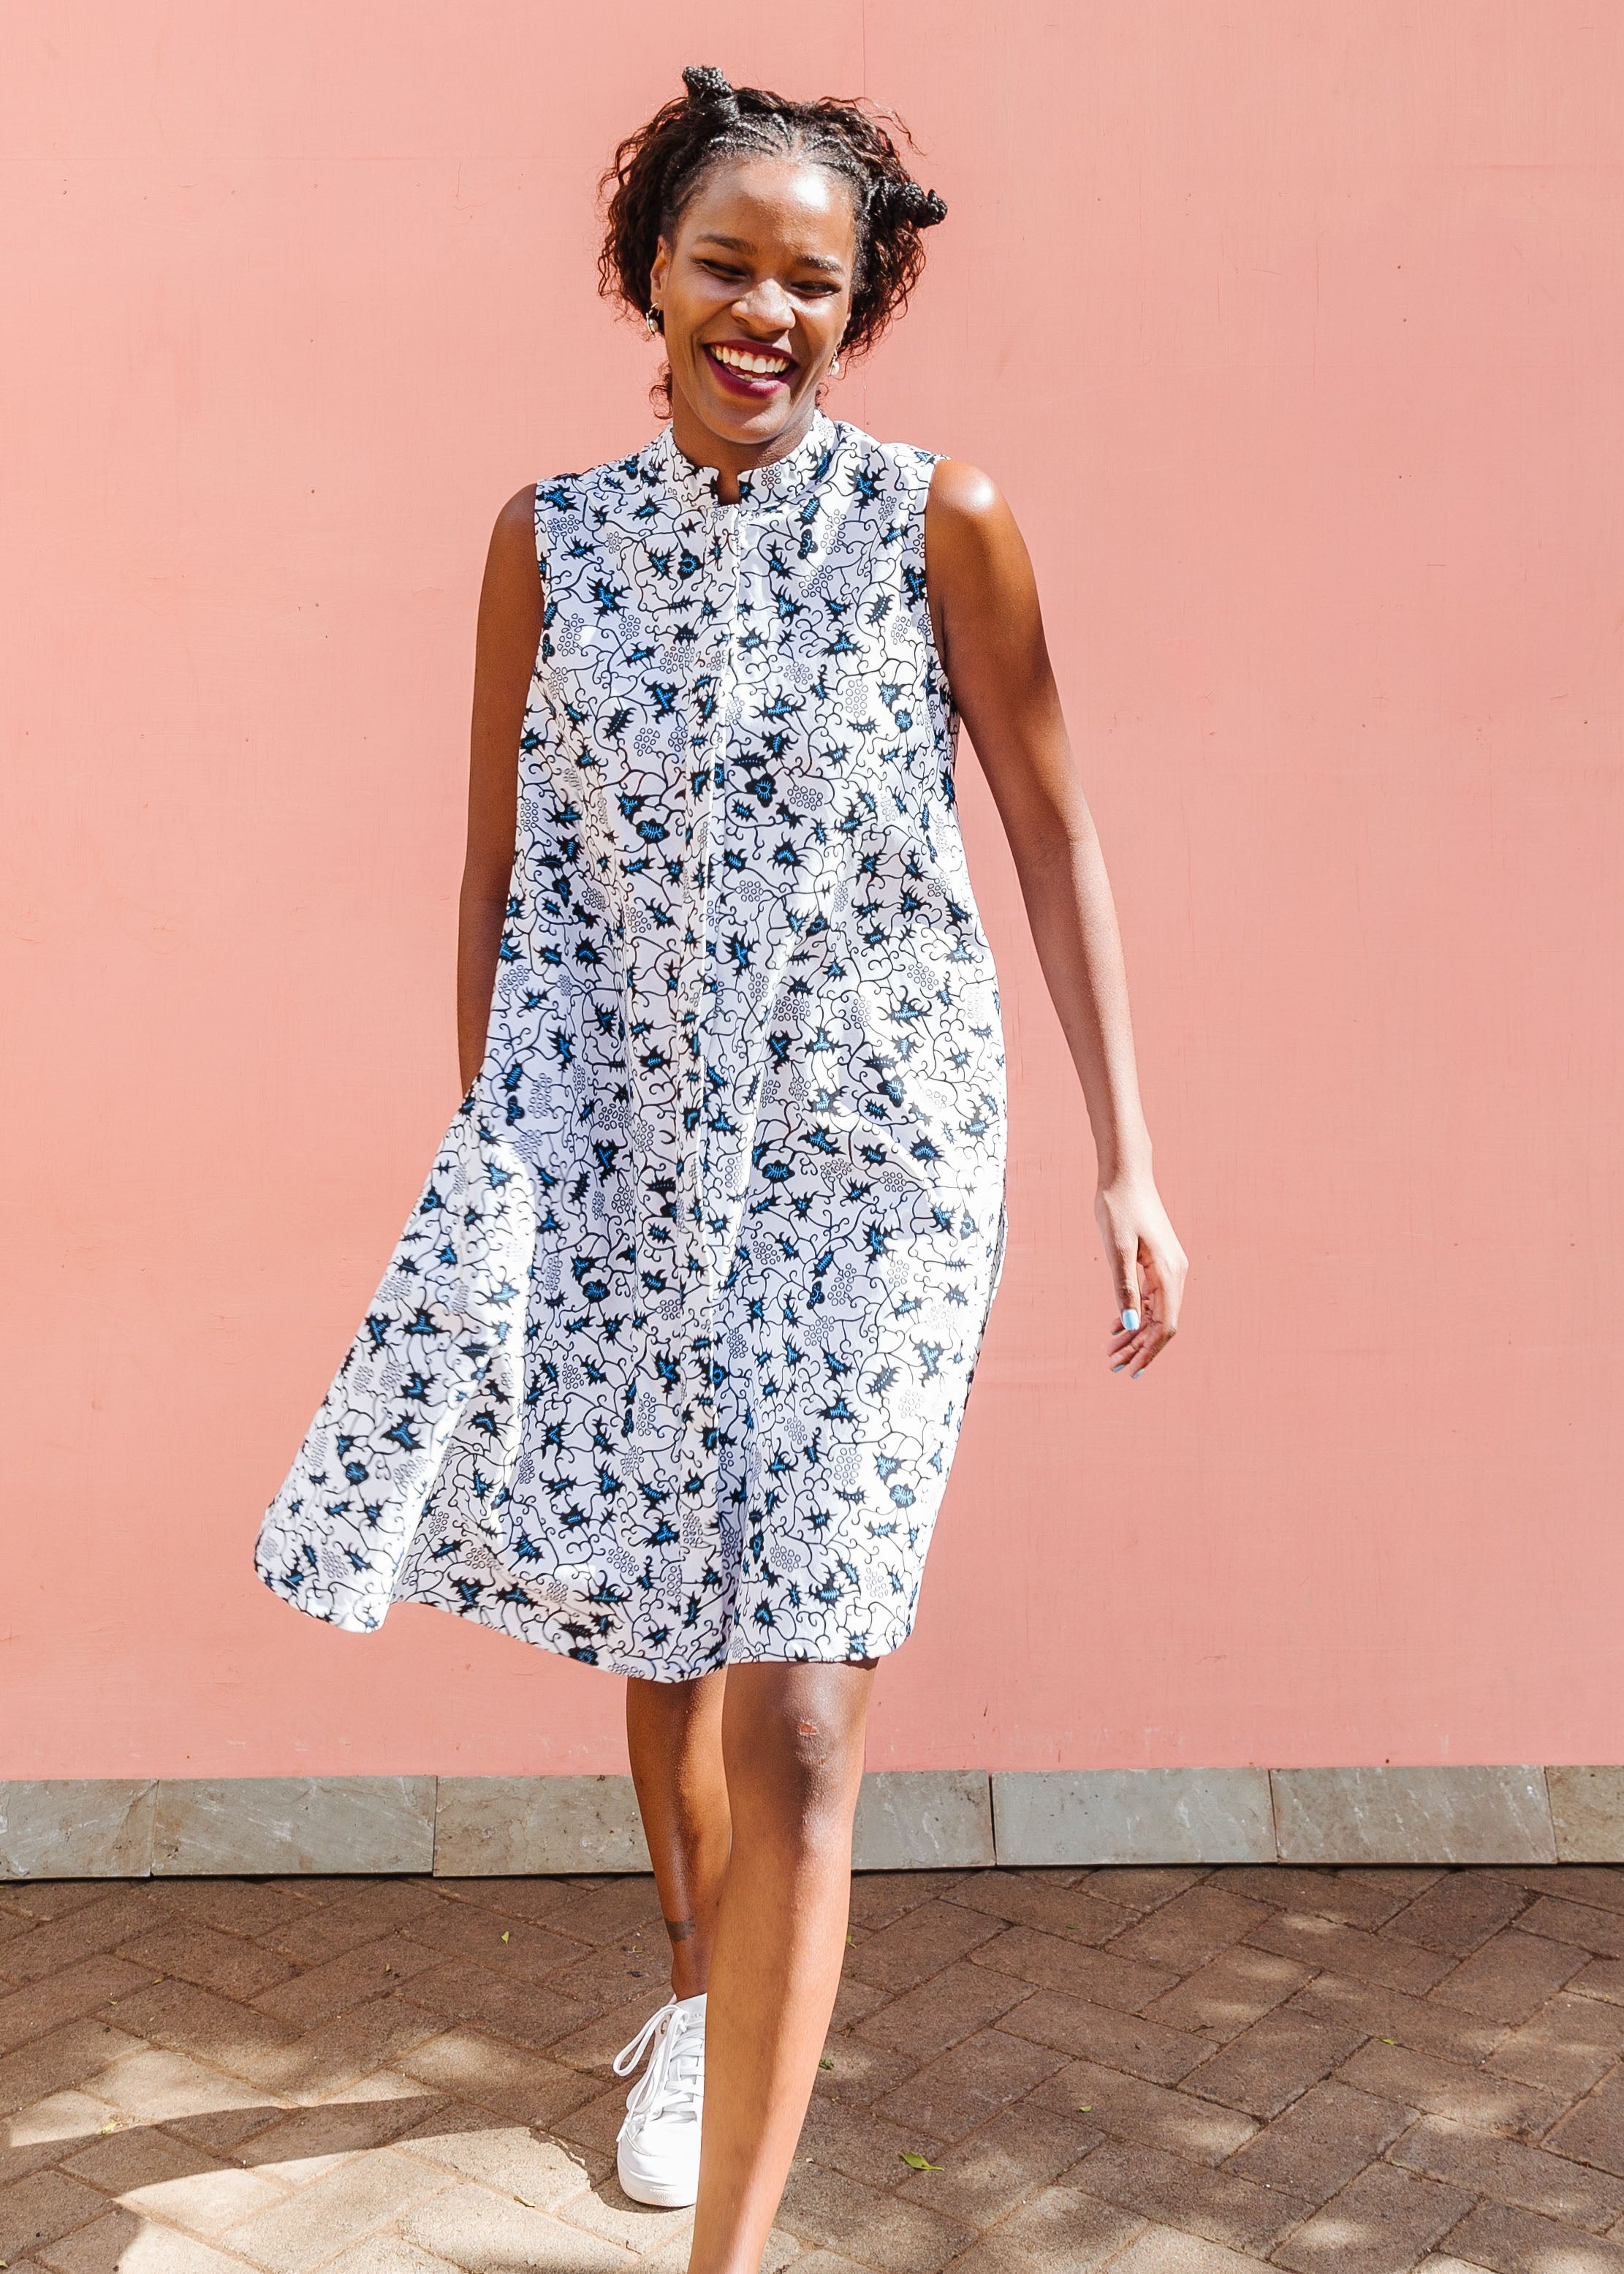 Model wearing white sleeveless dress with blue floral print.